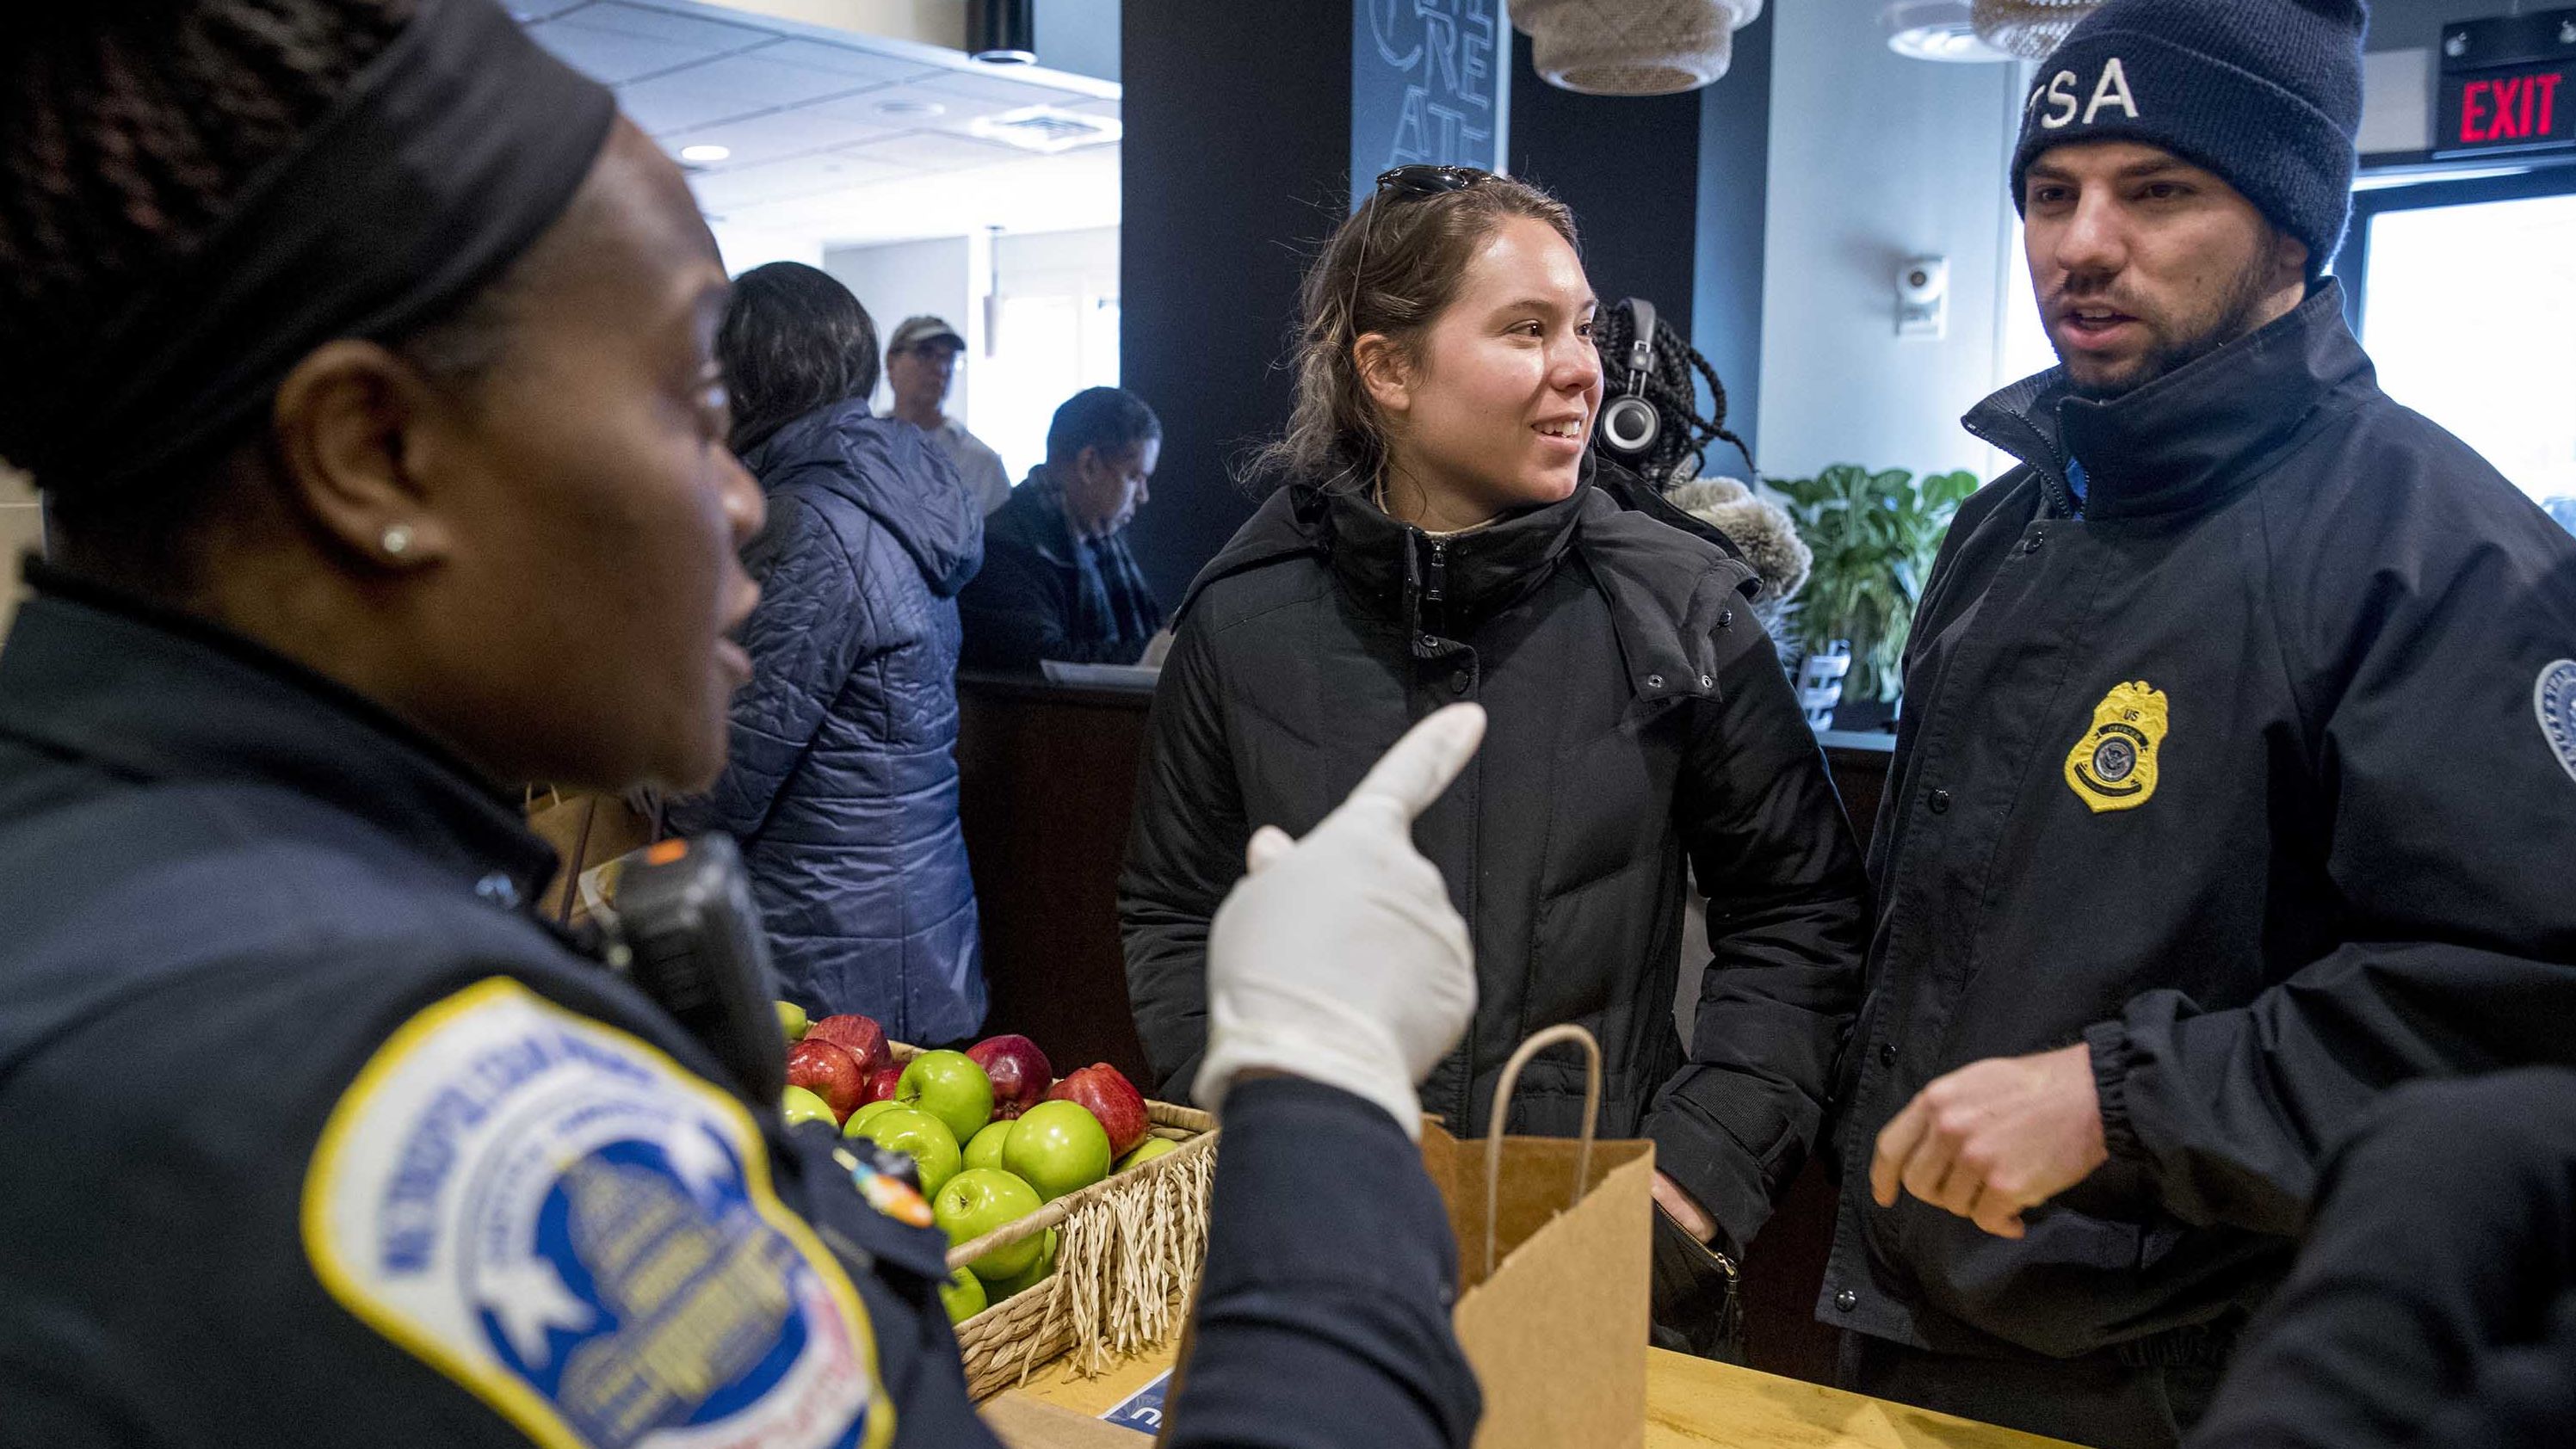 Metropolitan Police Officer and volunteer Adriane Benson, left, takes a food order for Shane Smith, a TSA agent, right, as he and other furloughed government workers affected by the shutdown receive free food and supplies at World Central Kitchen, the not-for-profit organization started by Chef Jose Andres, Tuesday, Jan. 22, 2019 in Washington. 